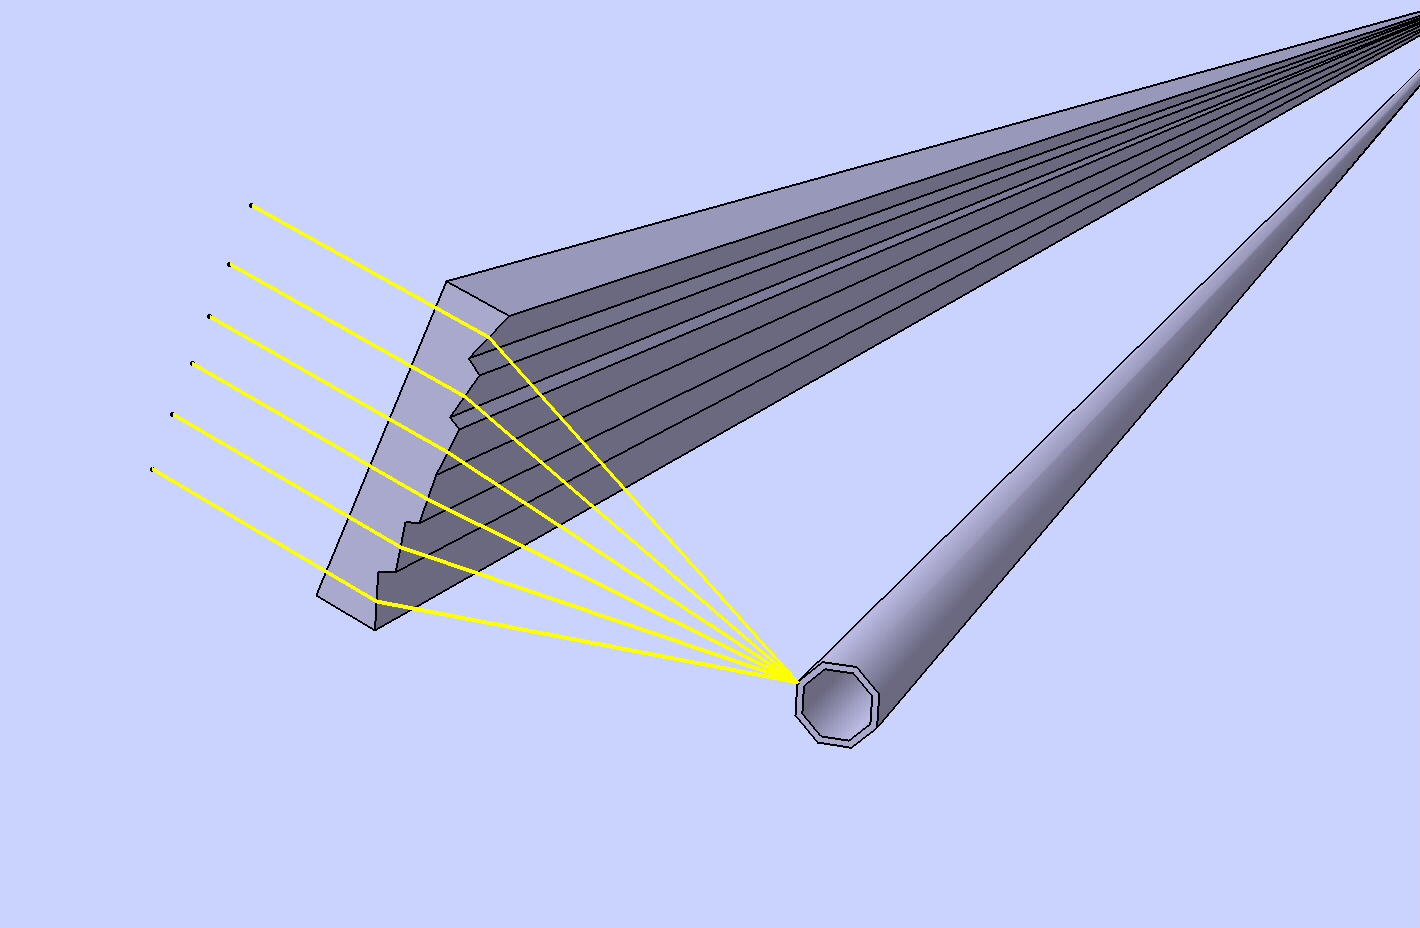 The linear Fresnel lenses with (a) the linear Fresnel lens focuses